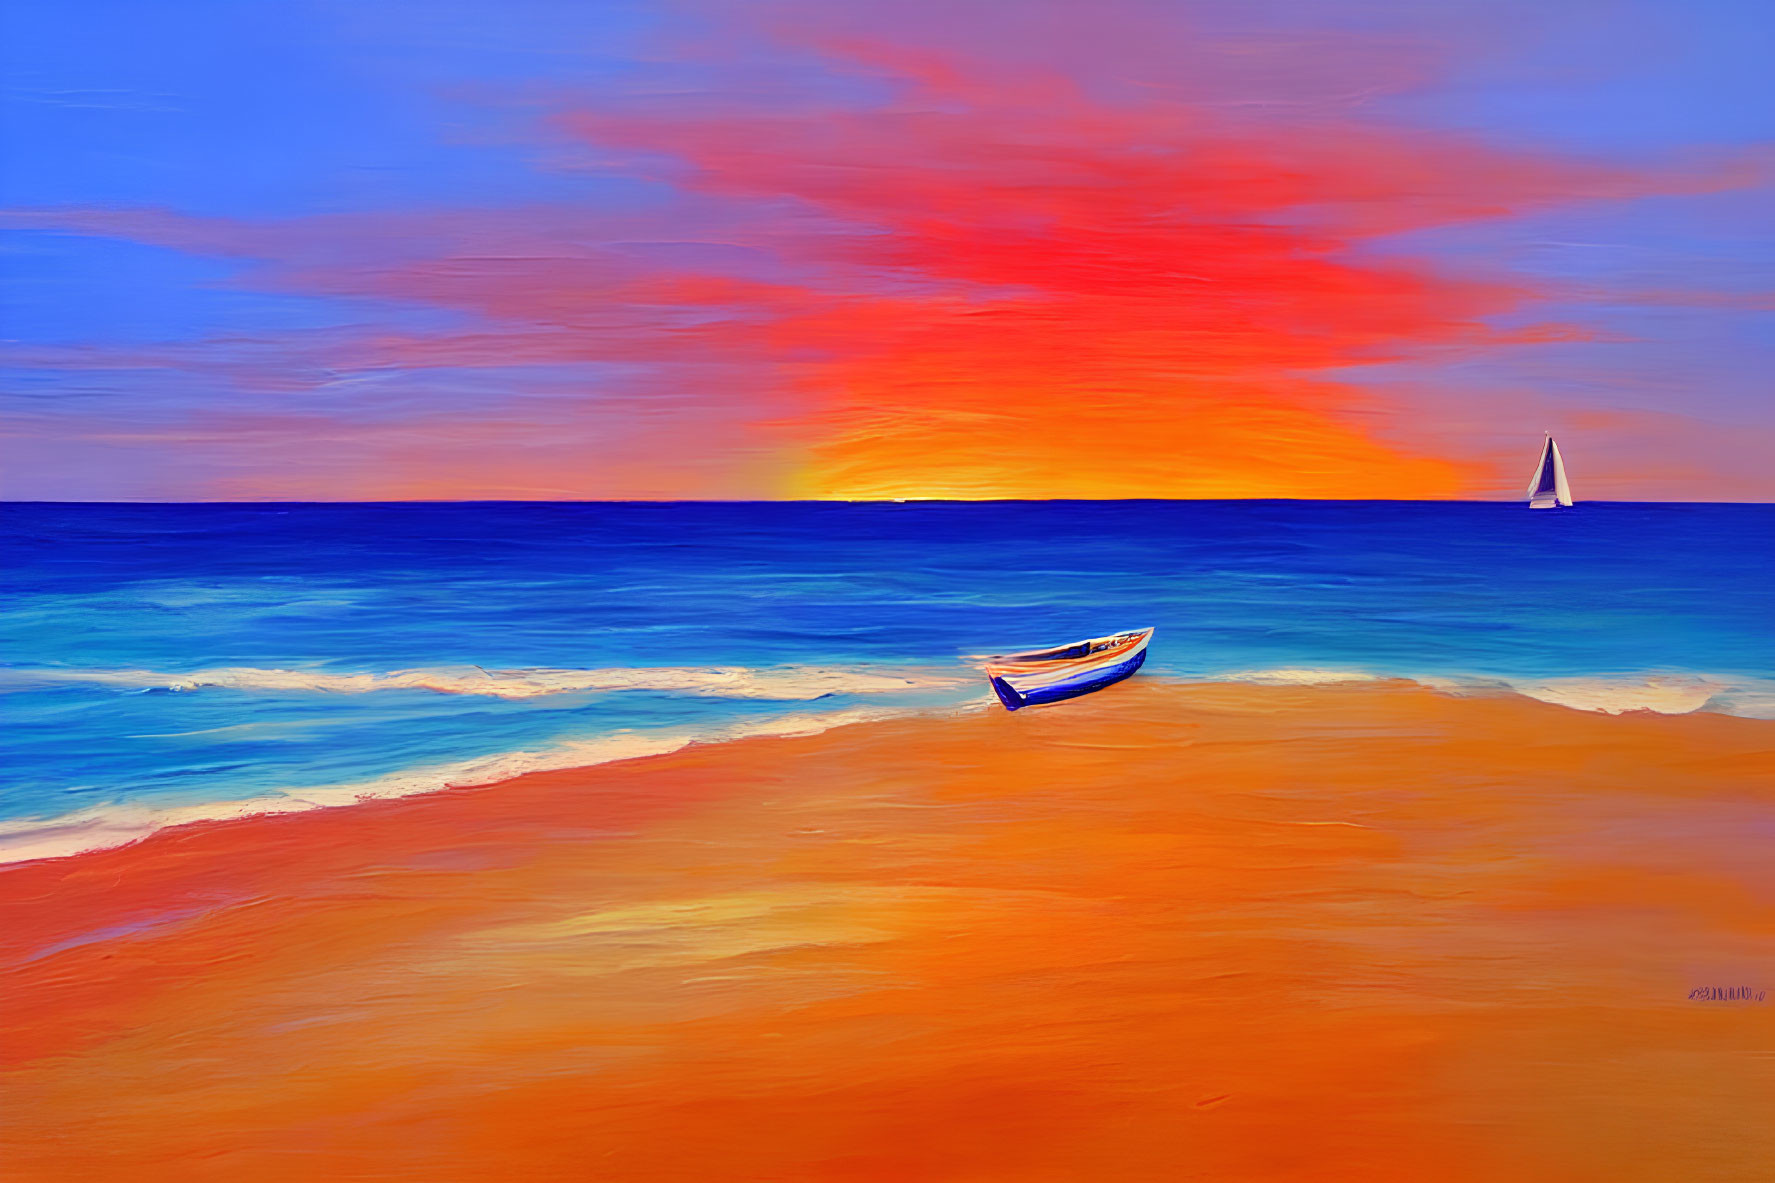 Surreal beach sunset painting with boat and sailboat in colorful sky